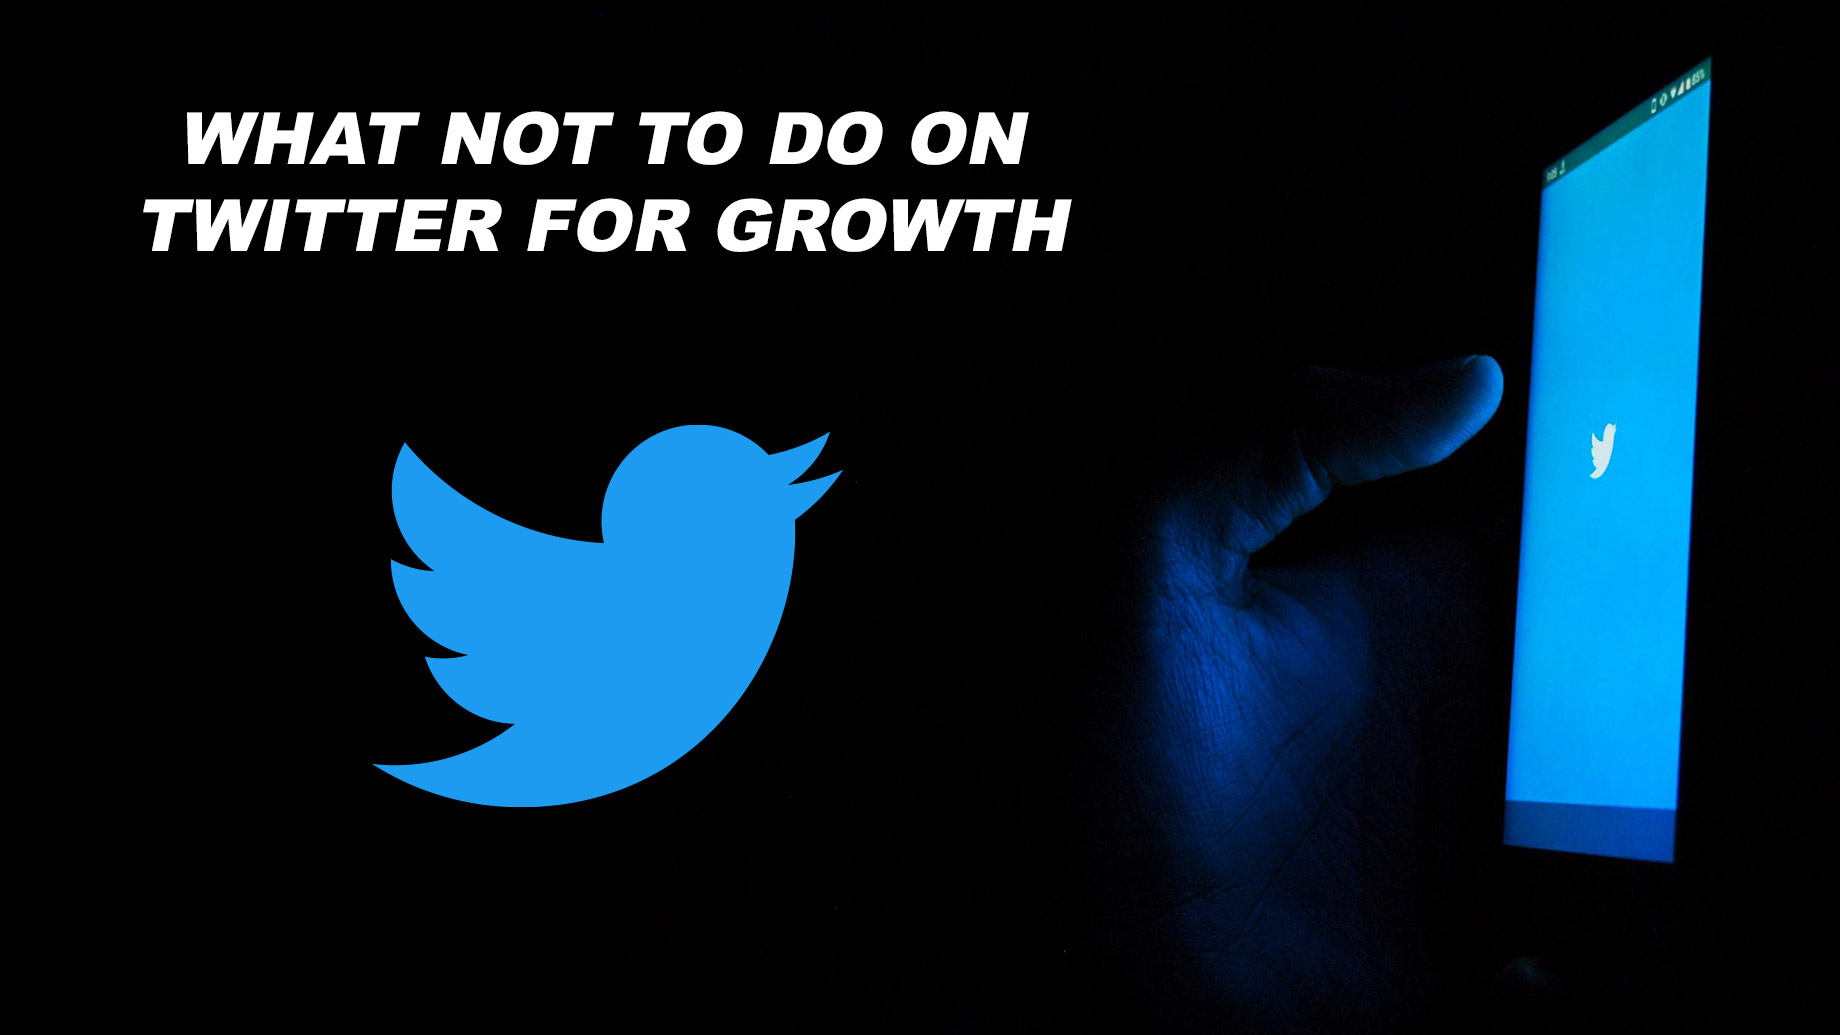 What Not To Do on Twitter for Growth